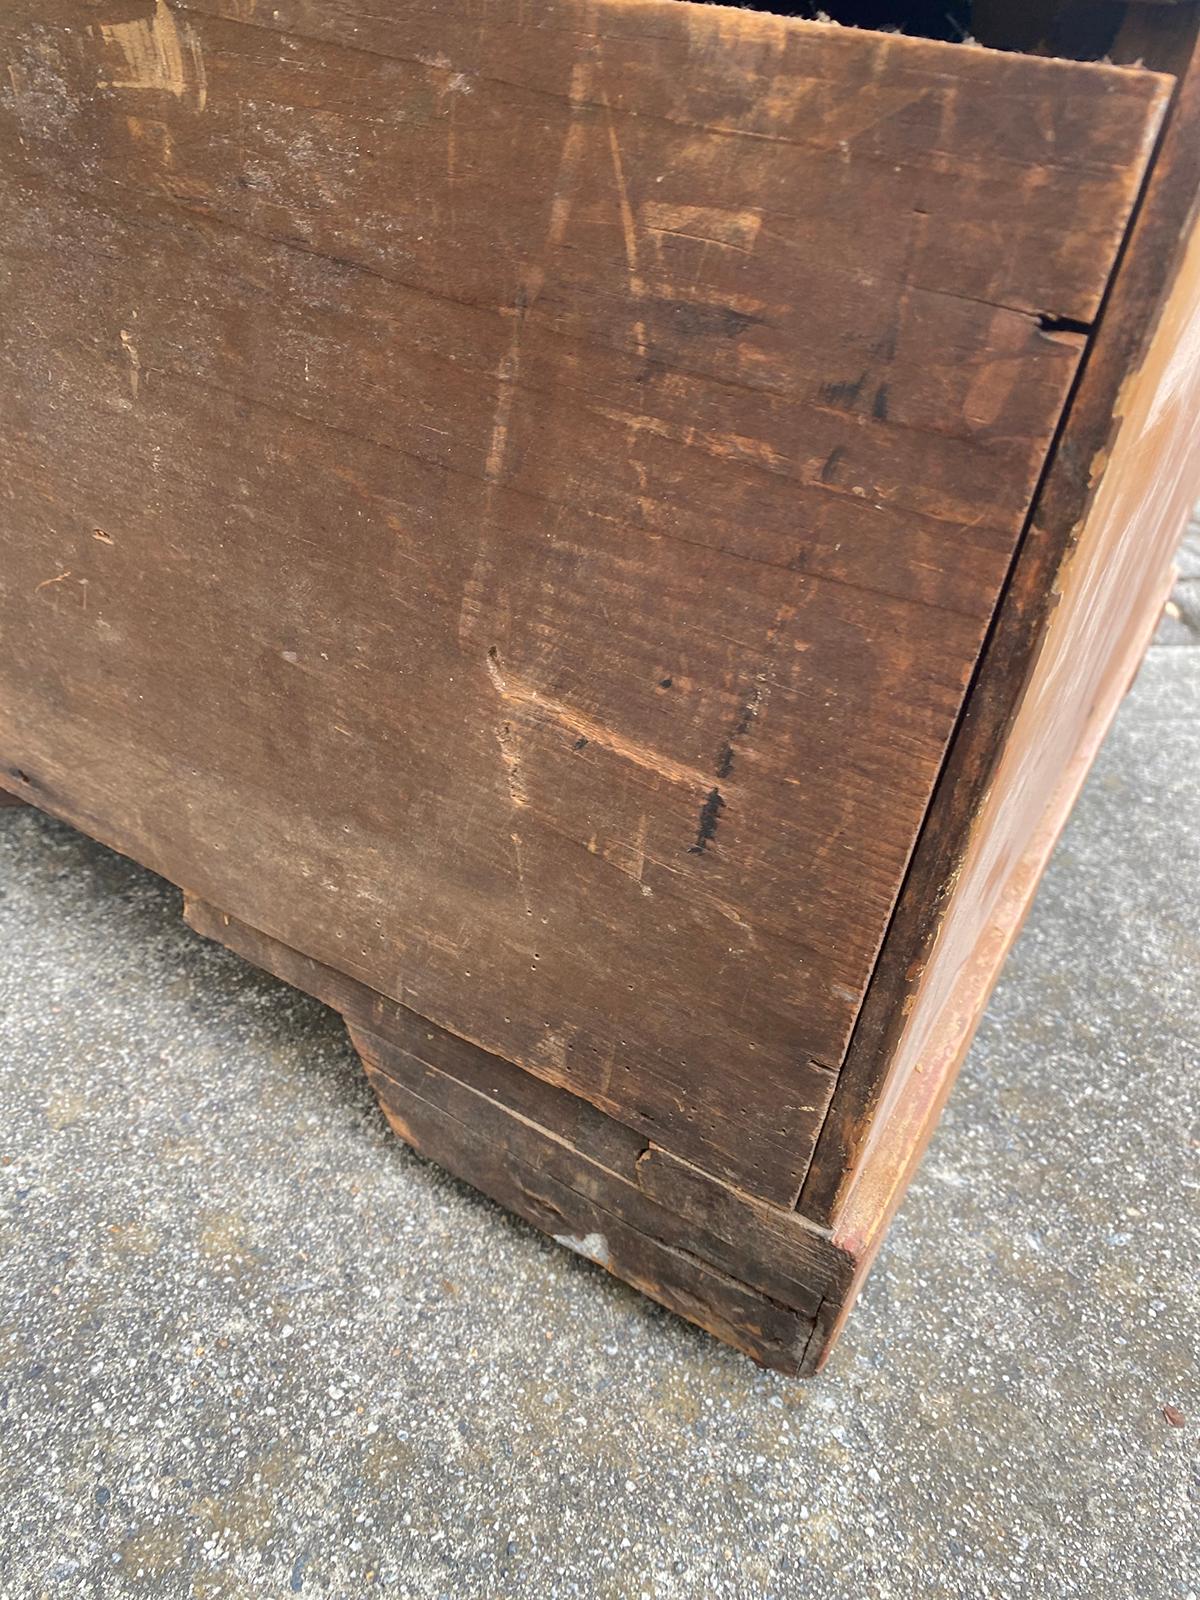 Circa 1880s-1890s English Pine Campaign Chest of Drawers For Sale 12